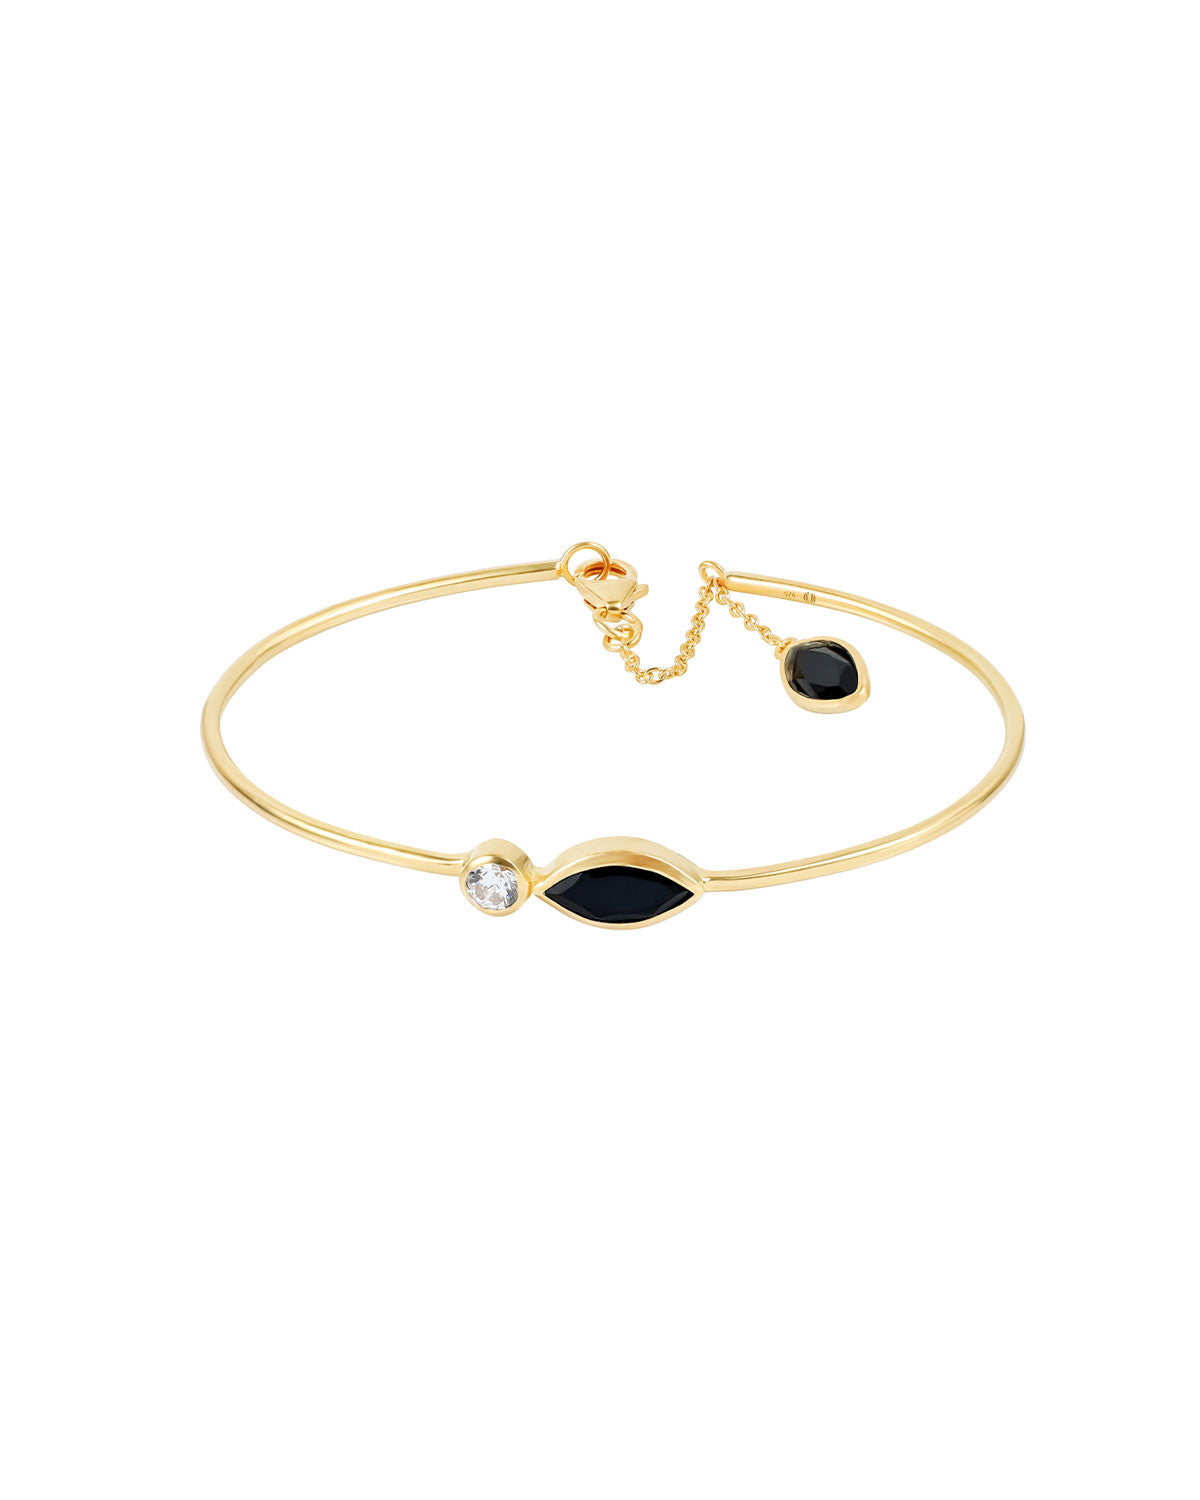 The ‘Euphorie’ Black Spinal Gold Bangle - Moon London